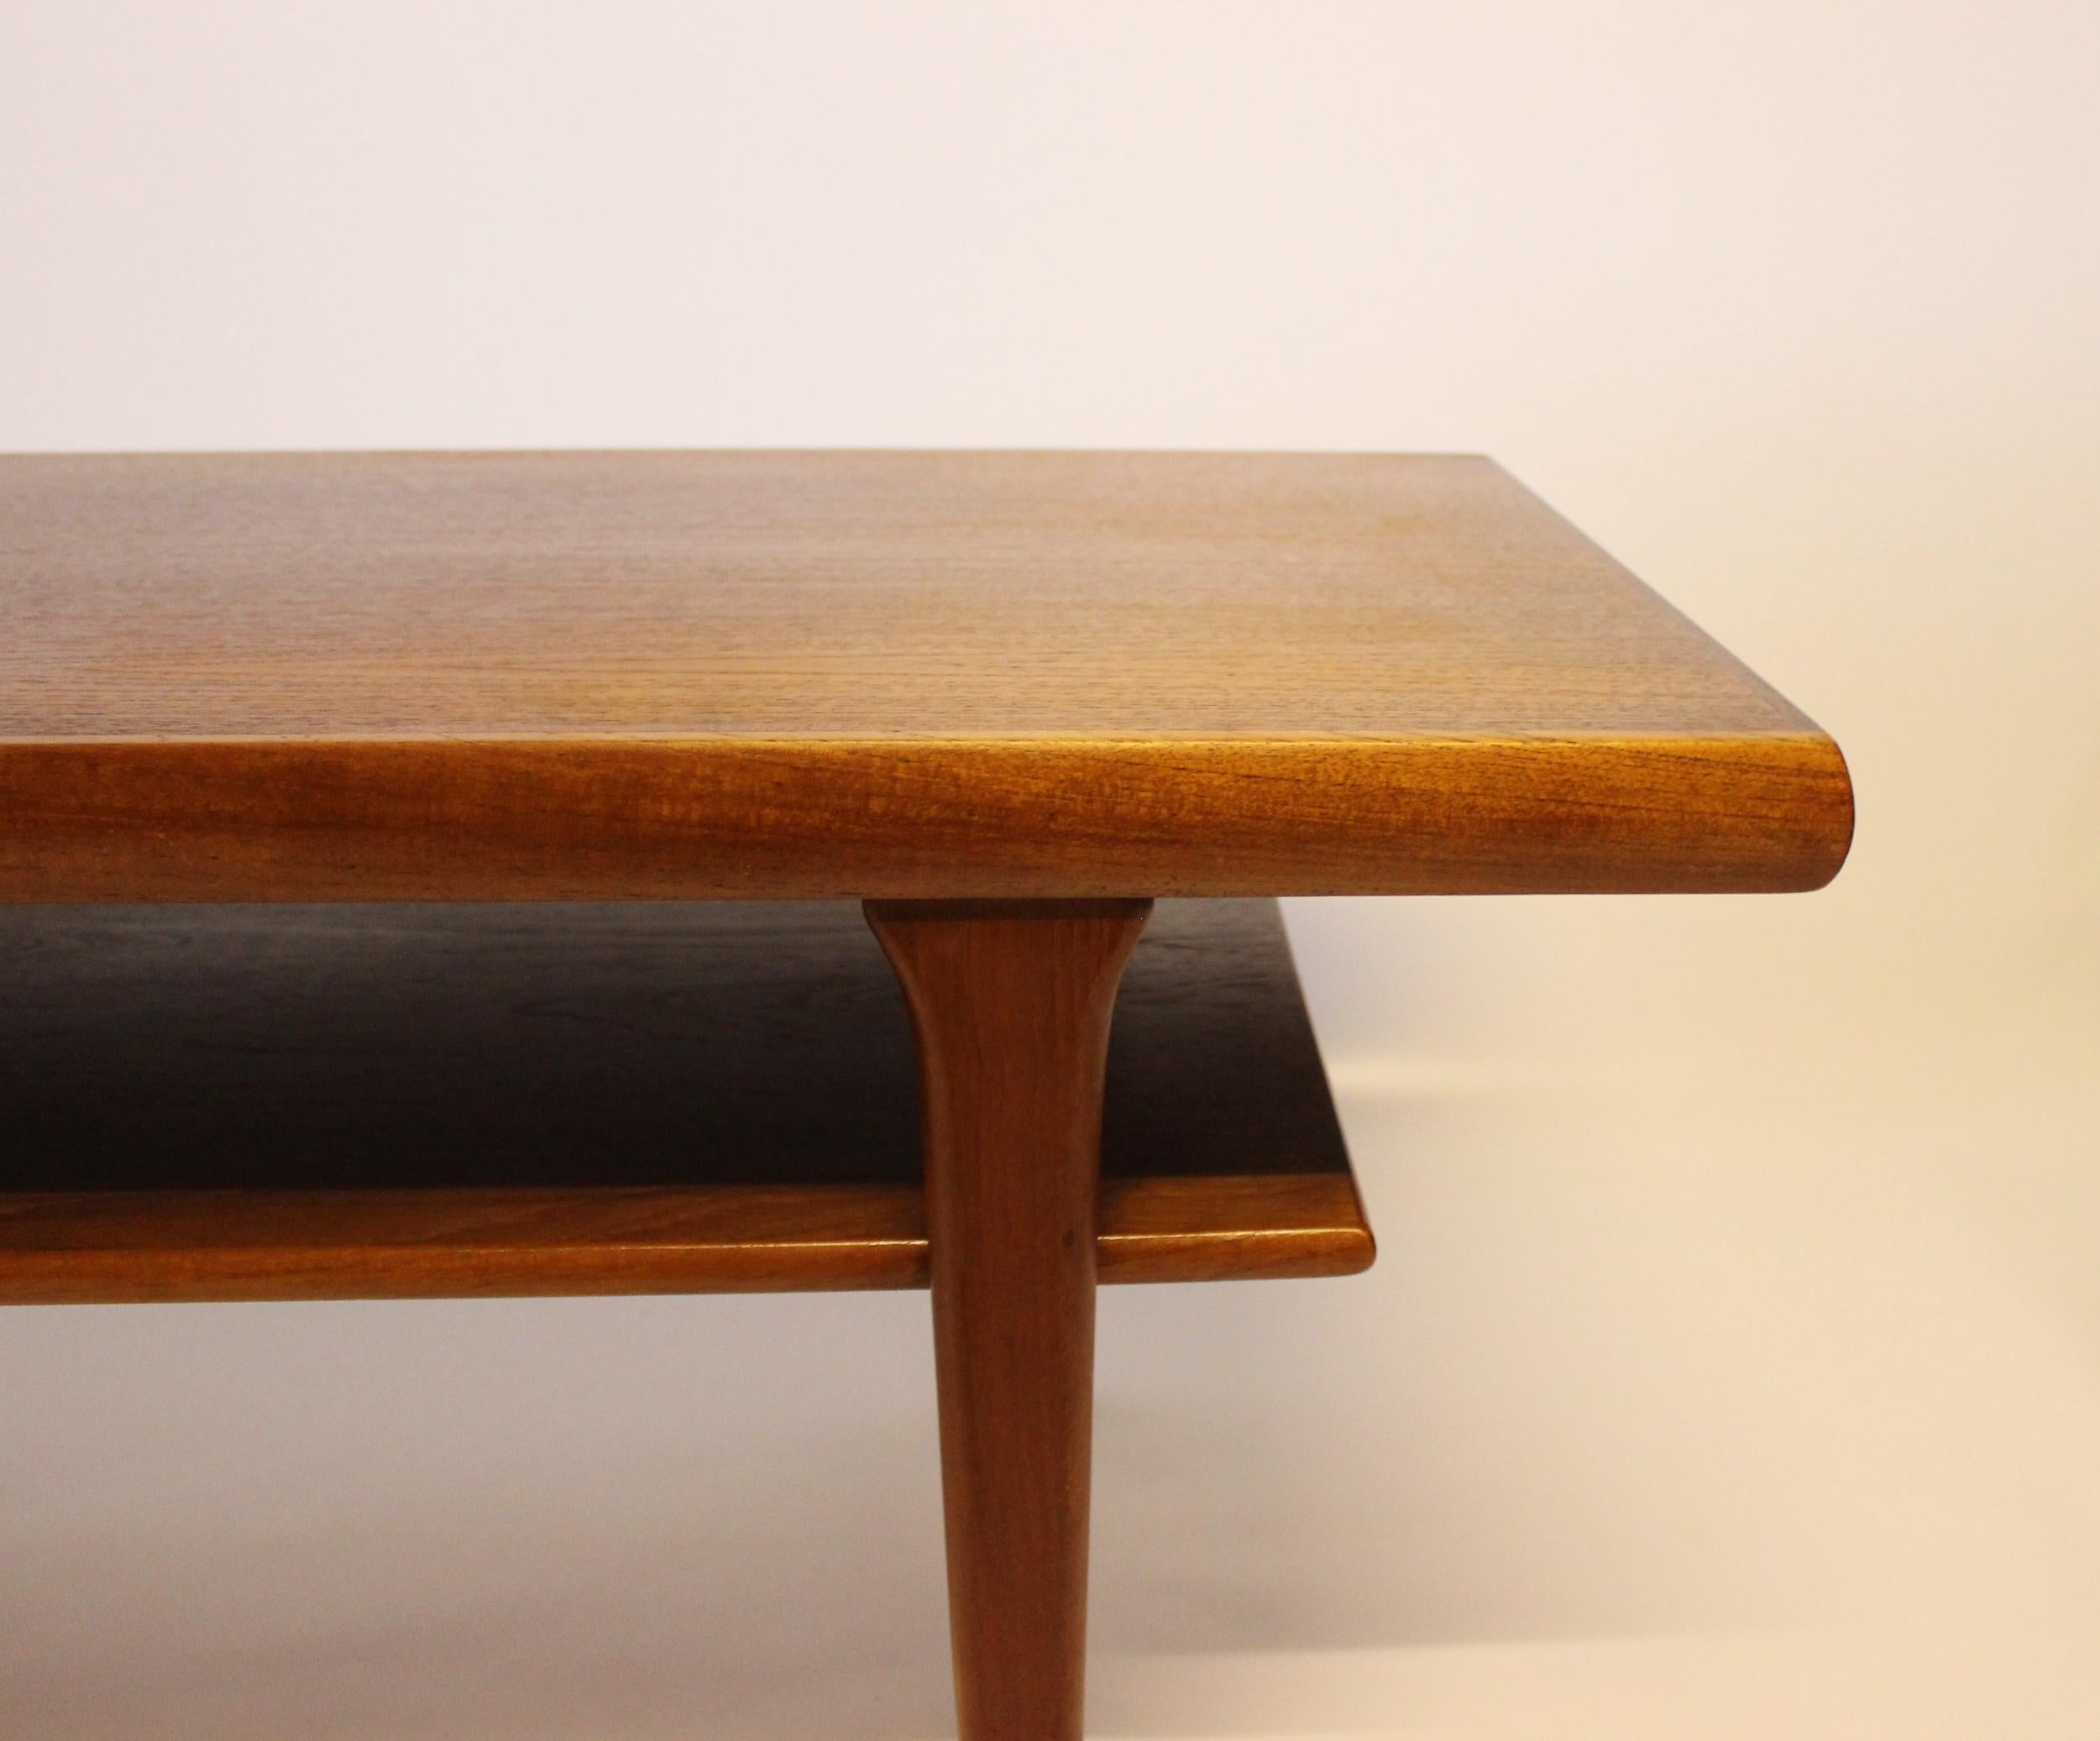 Mid-20th Century Coffee Table with Shelf in Teak of Danish Design from the 1960s For Sale